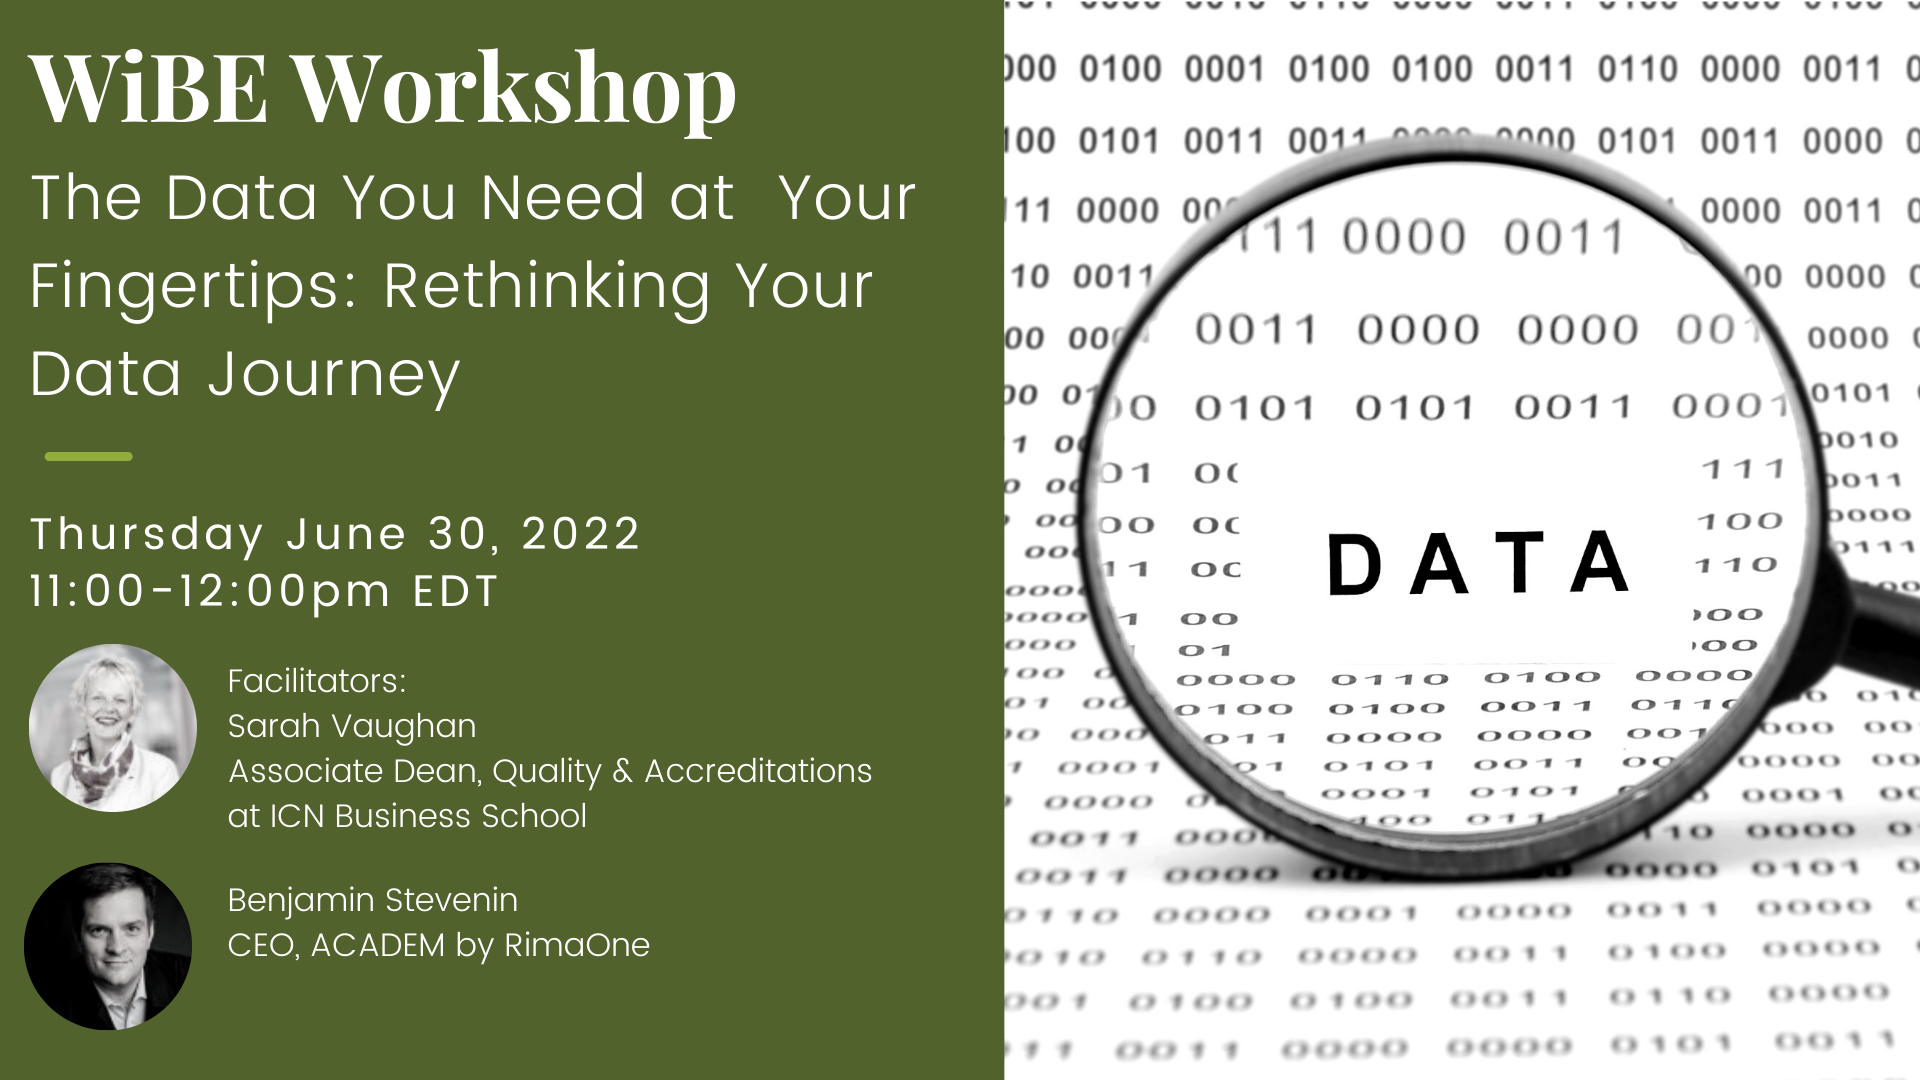 WORKSHOP: The Data You Need at Your Fingertips: Rethinking Your Data Journey